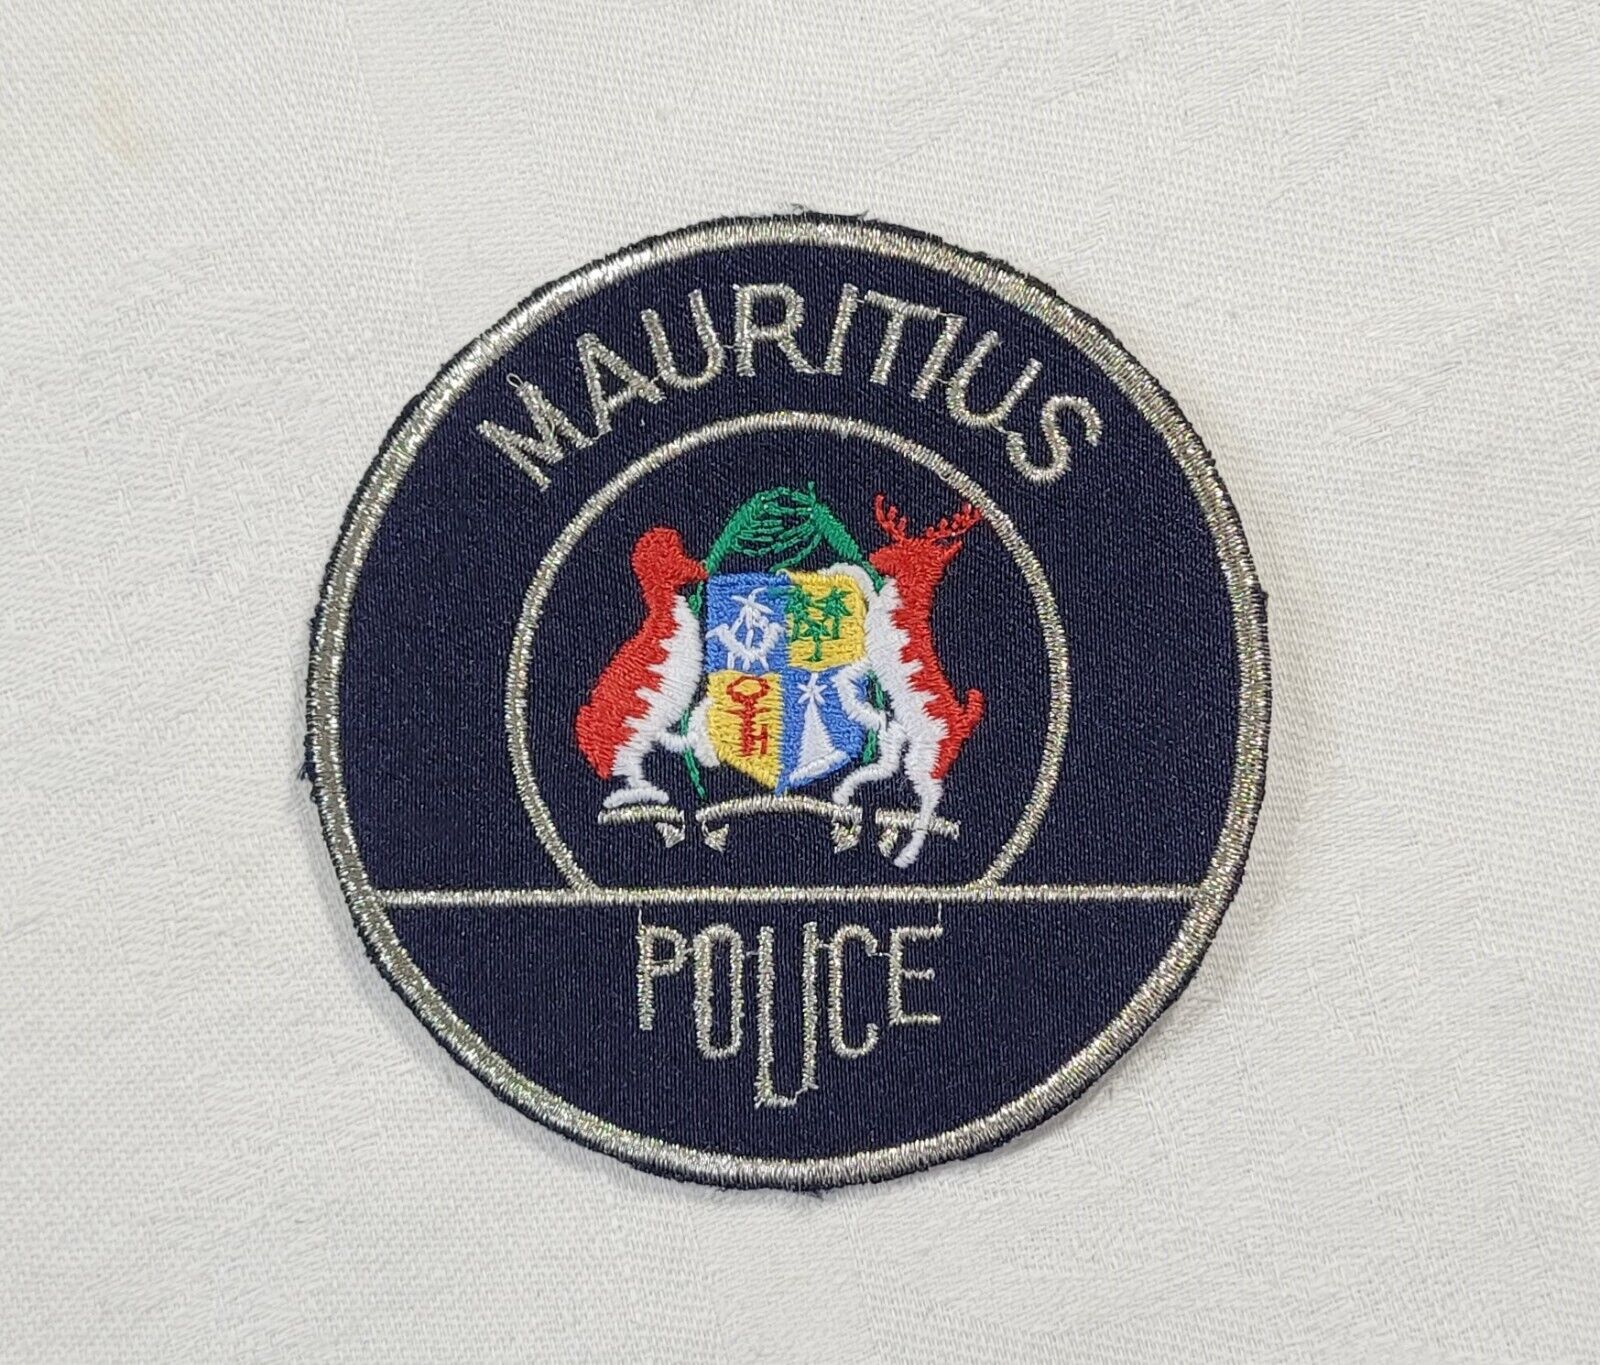 RARE MOURITIUS POLICE FORCE SHOULDER PATCH (INDIAN OCEAN ISLAND NATION)